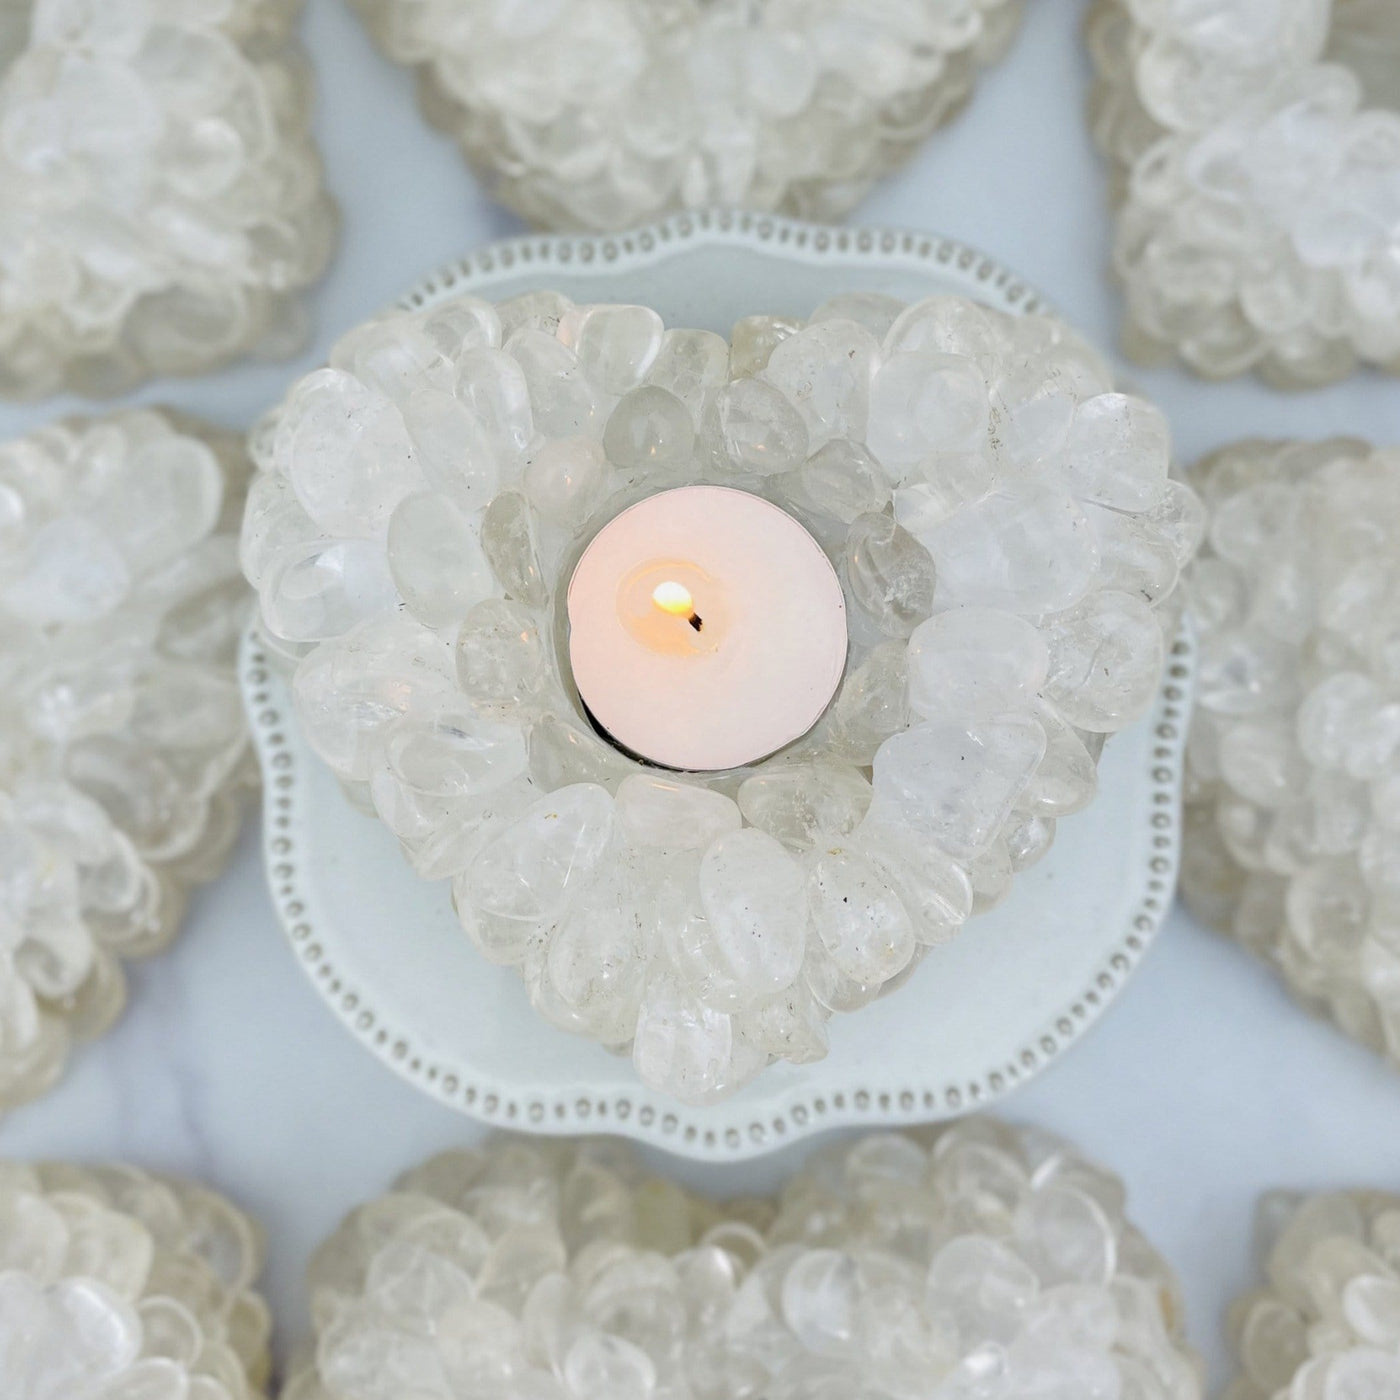 Heart shaped candle holder that is made with crystal quartz tumbled stones that are glued together. In this photo it is shown with a tealight lit candle and more in the background.